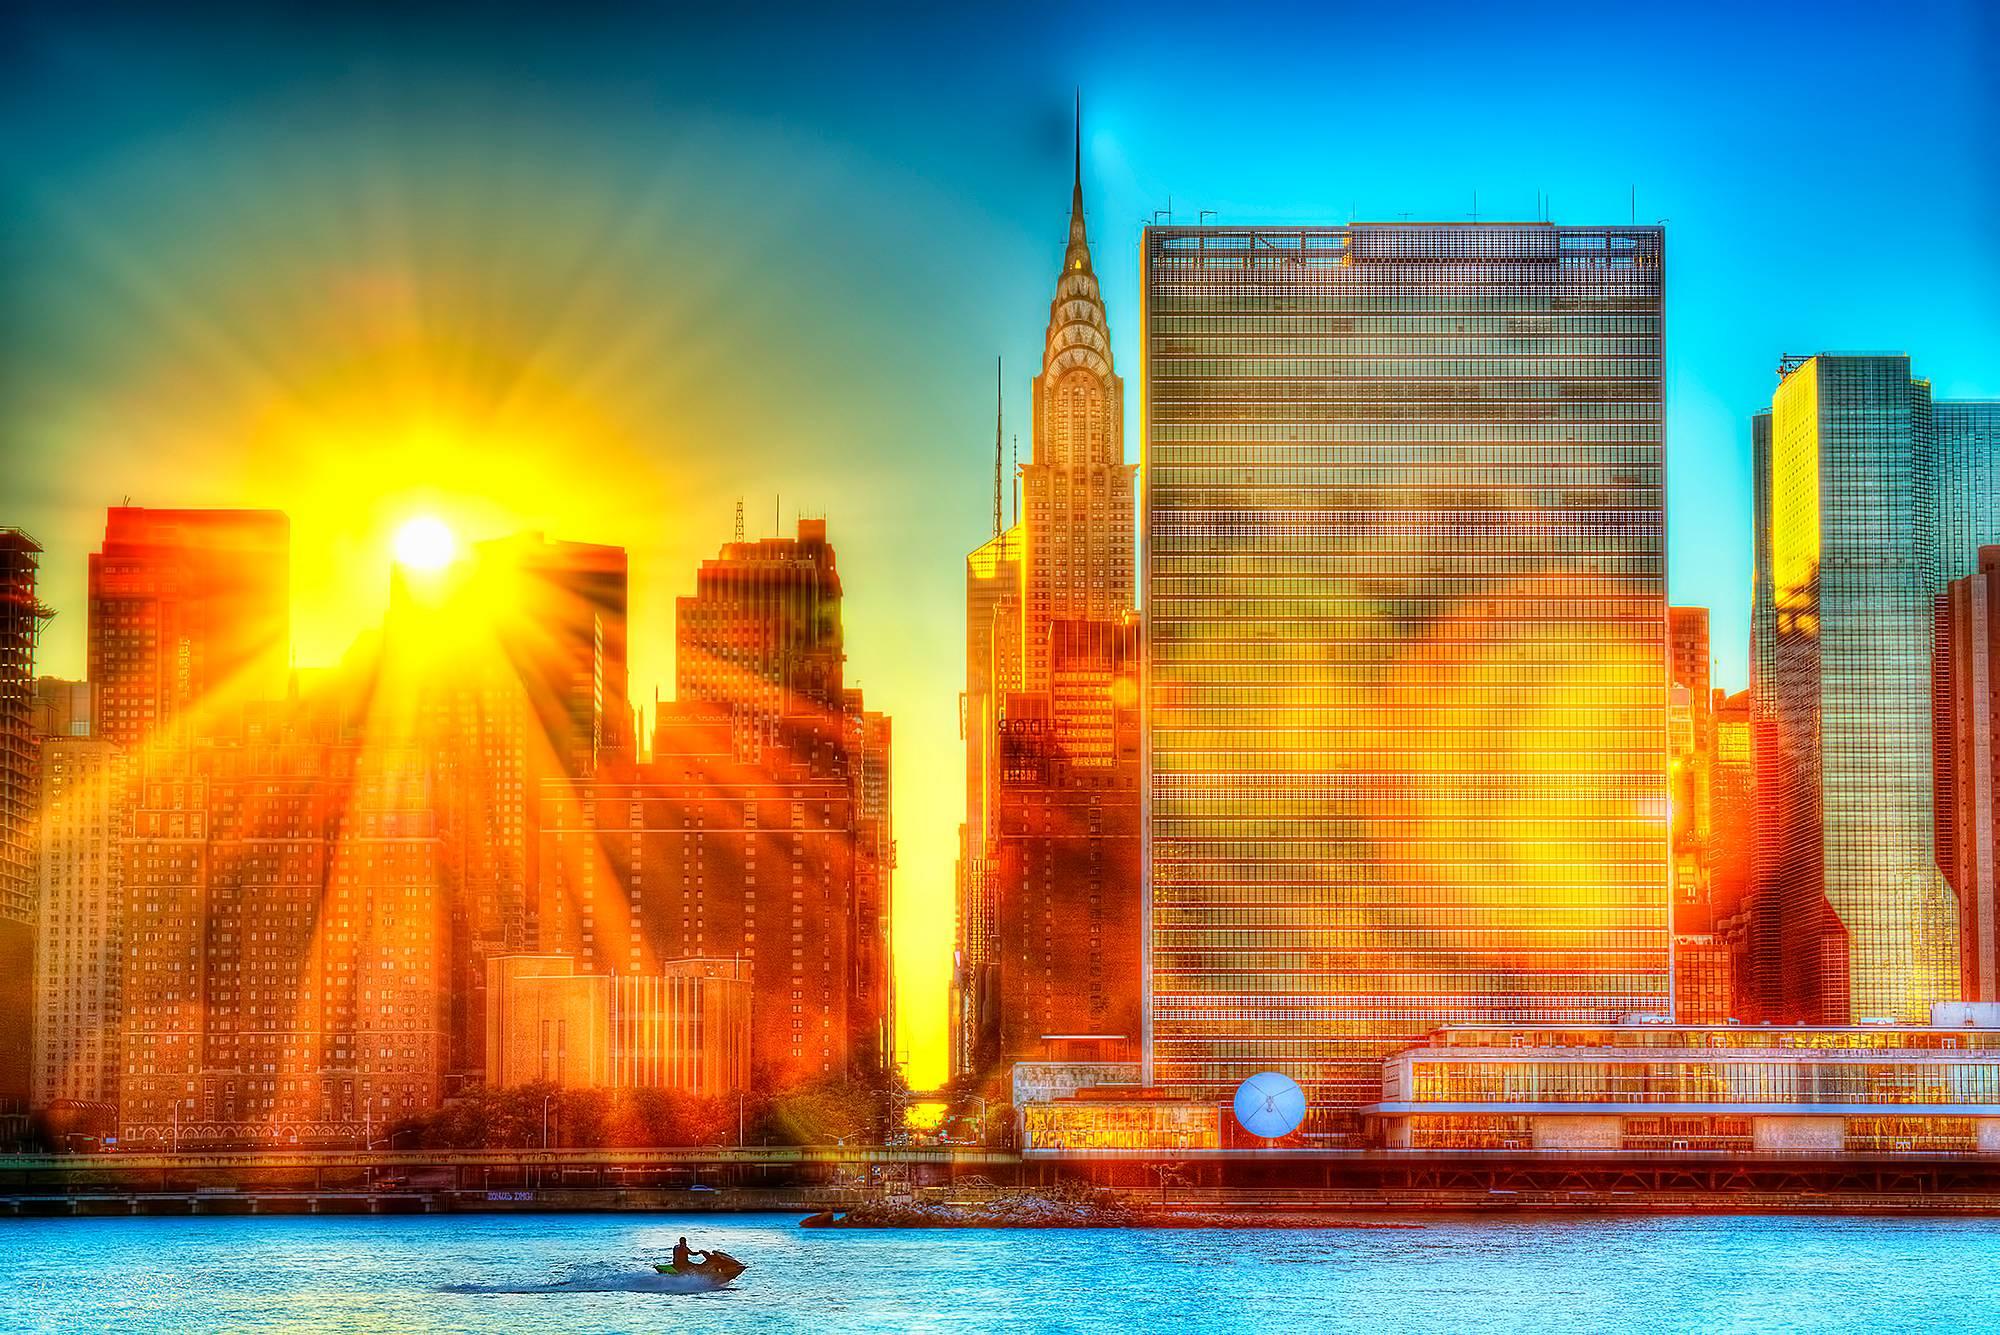 Mitchell Funk Landscape Photograph - United Nations and Manhattan Skyline wrapped in Divine Light with Jet Ski